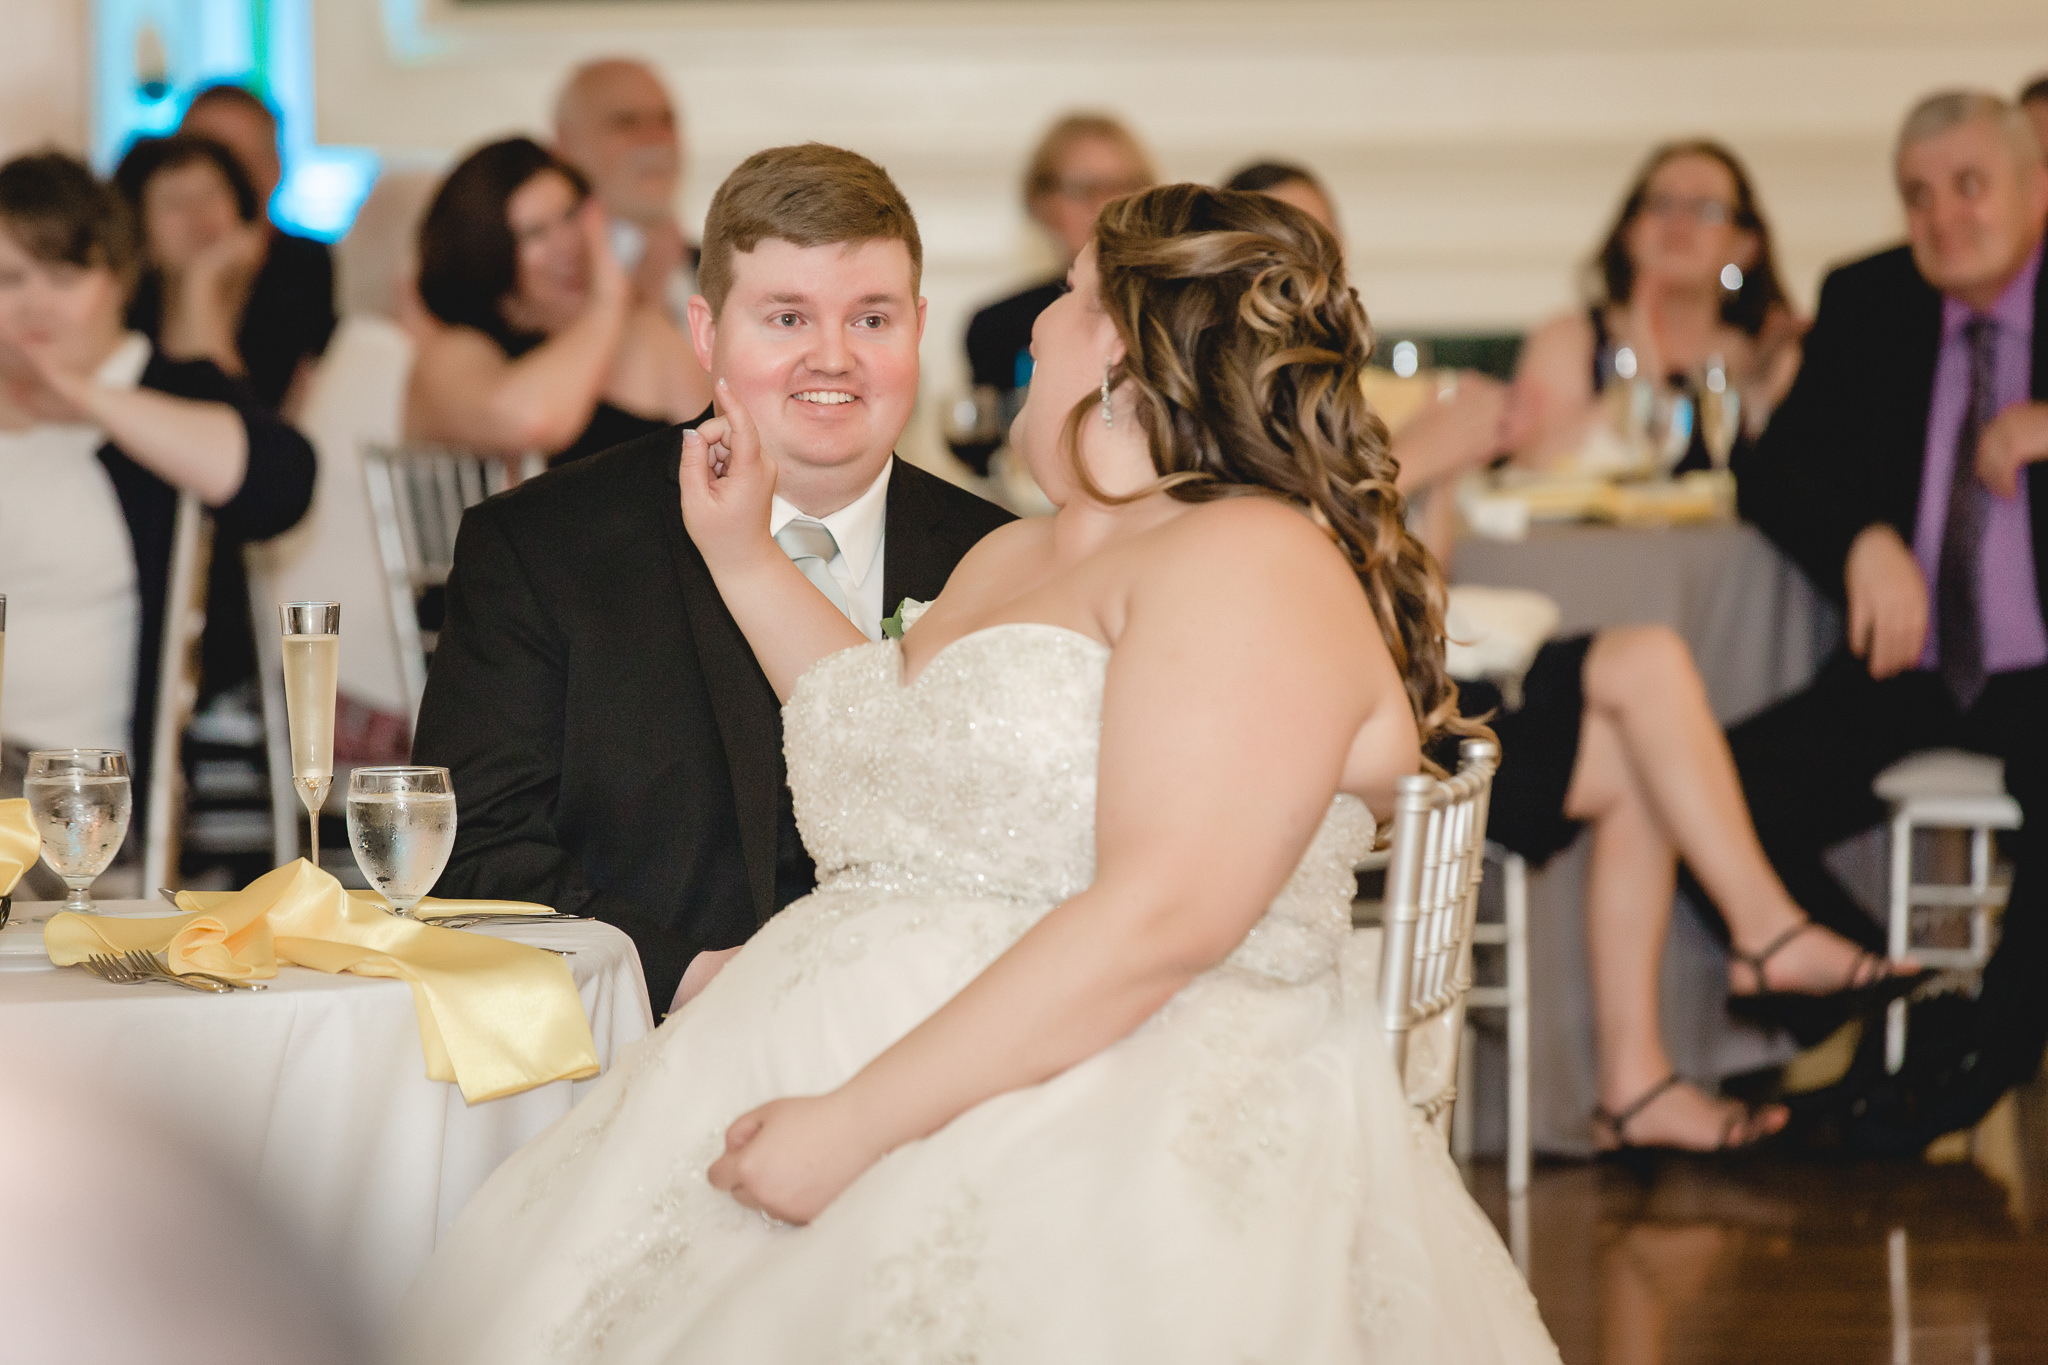 Speeches and toasts at Soldiers & Sailors wedding reception